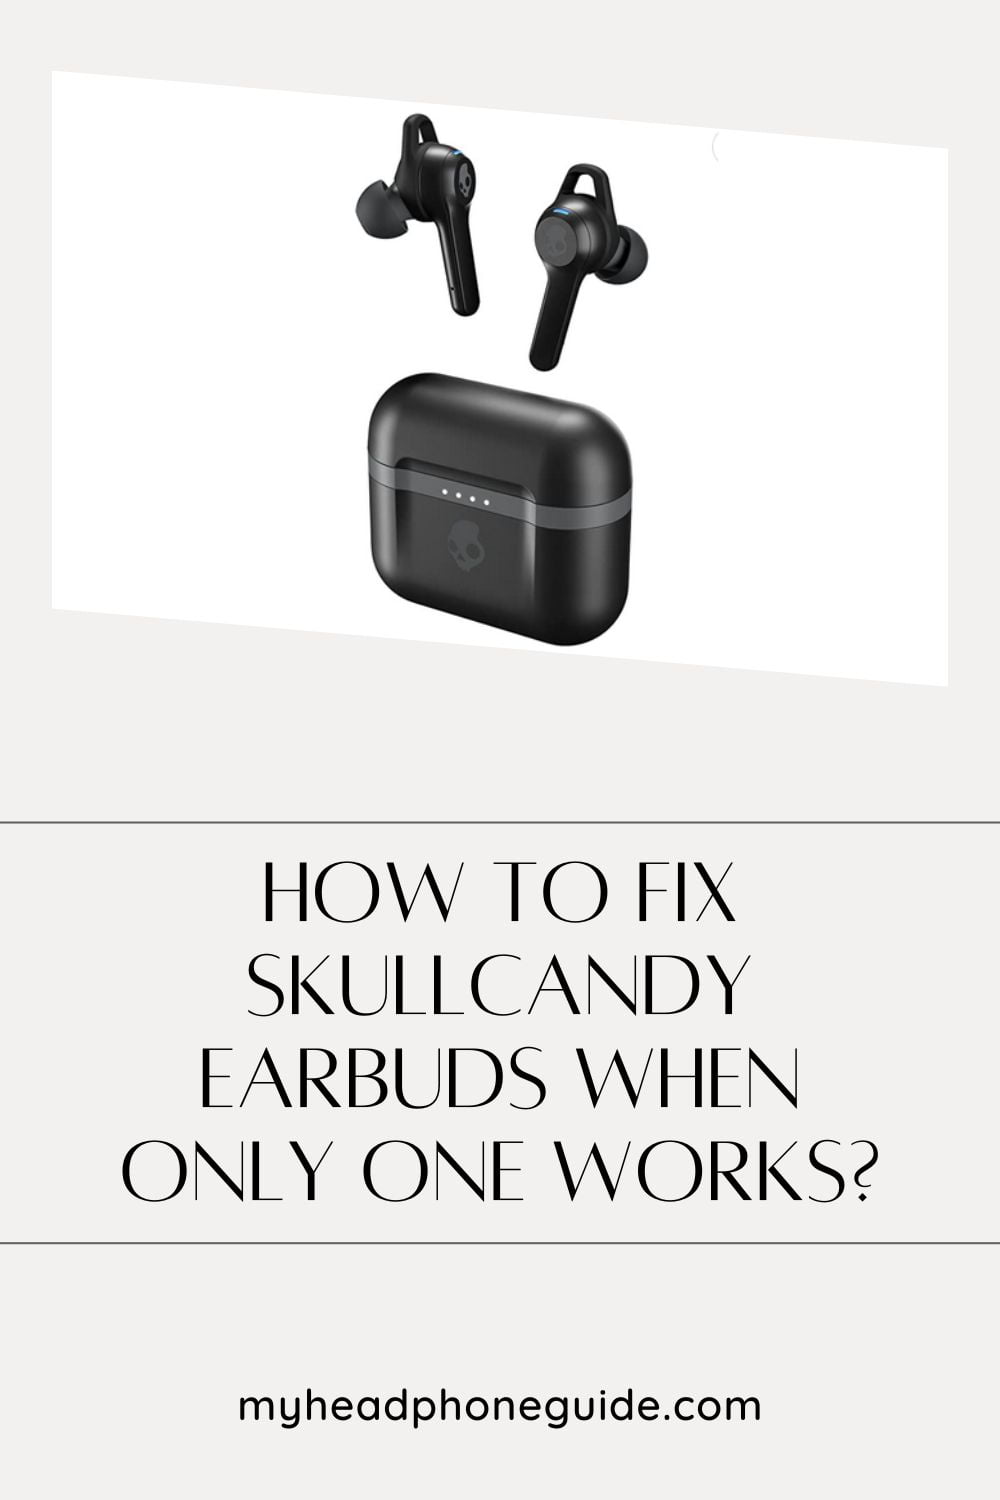 How To Fix Skullcandy Earbuds When Only One Works